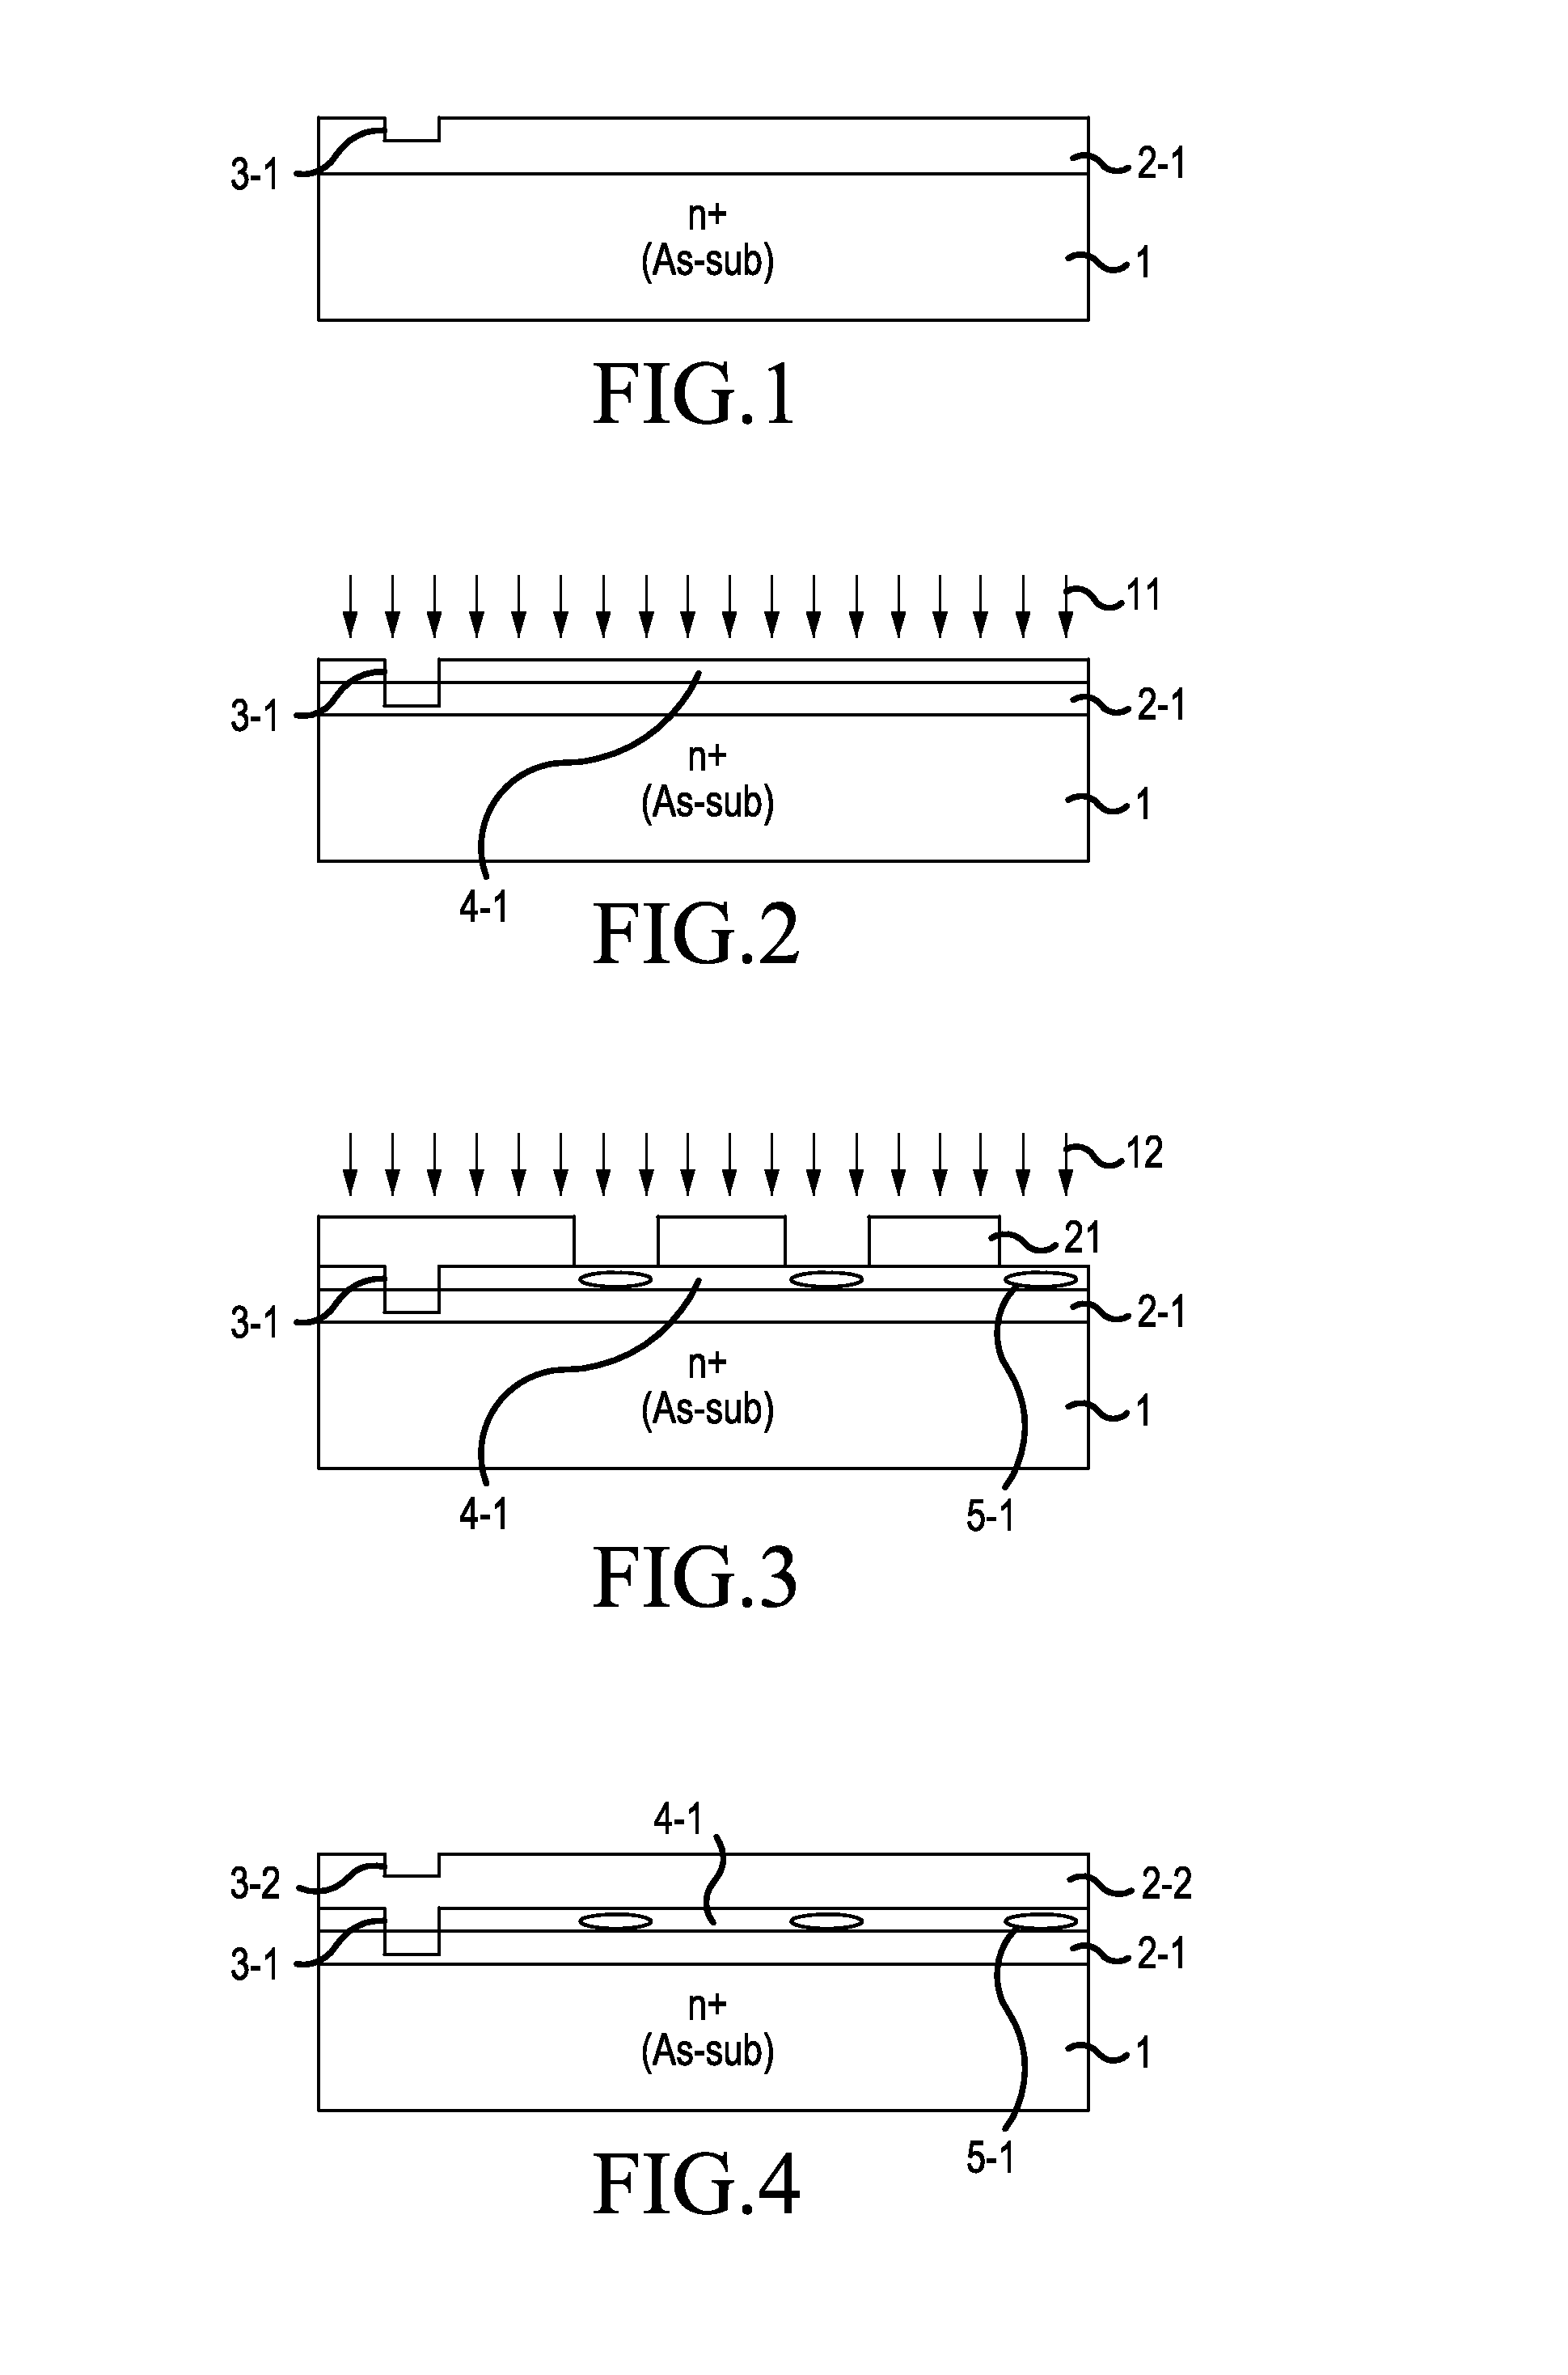 Semiconductor device manufacturing method